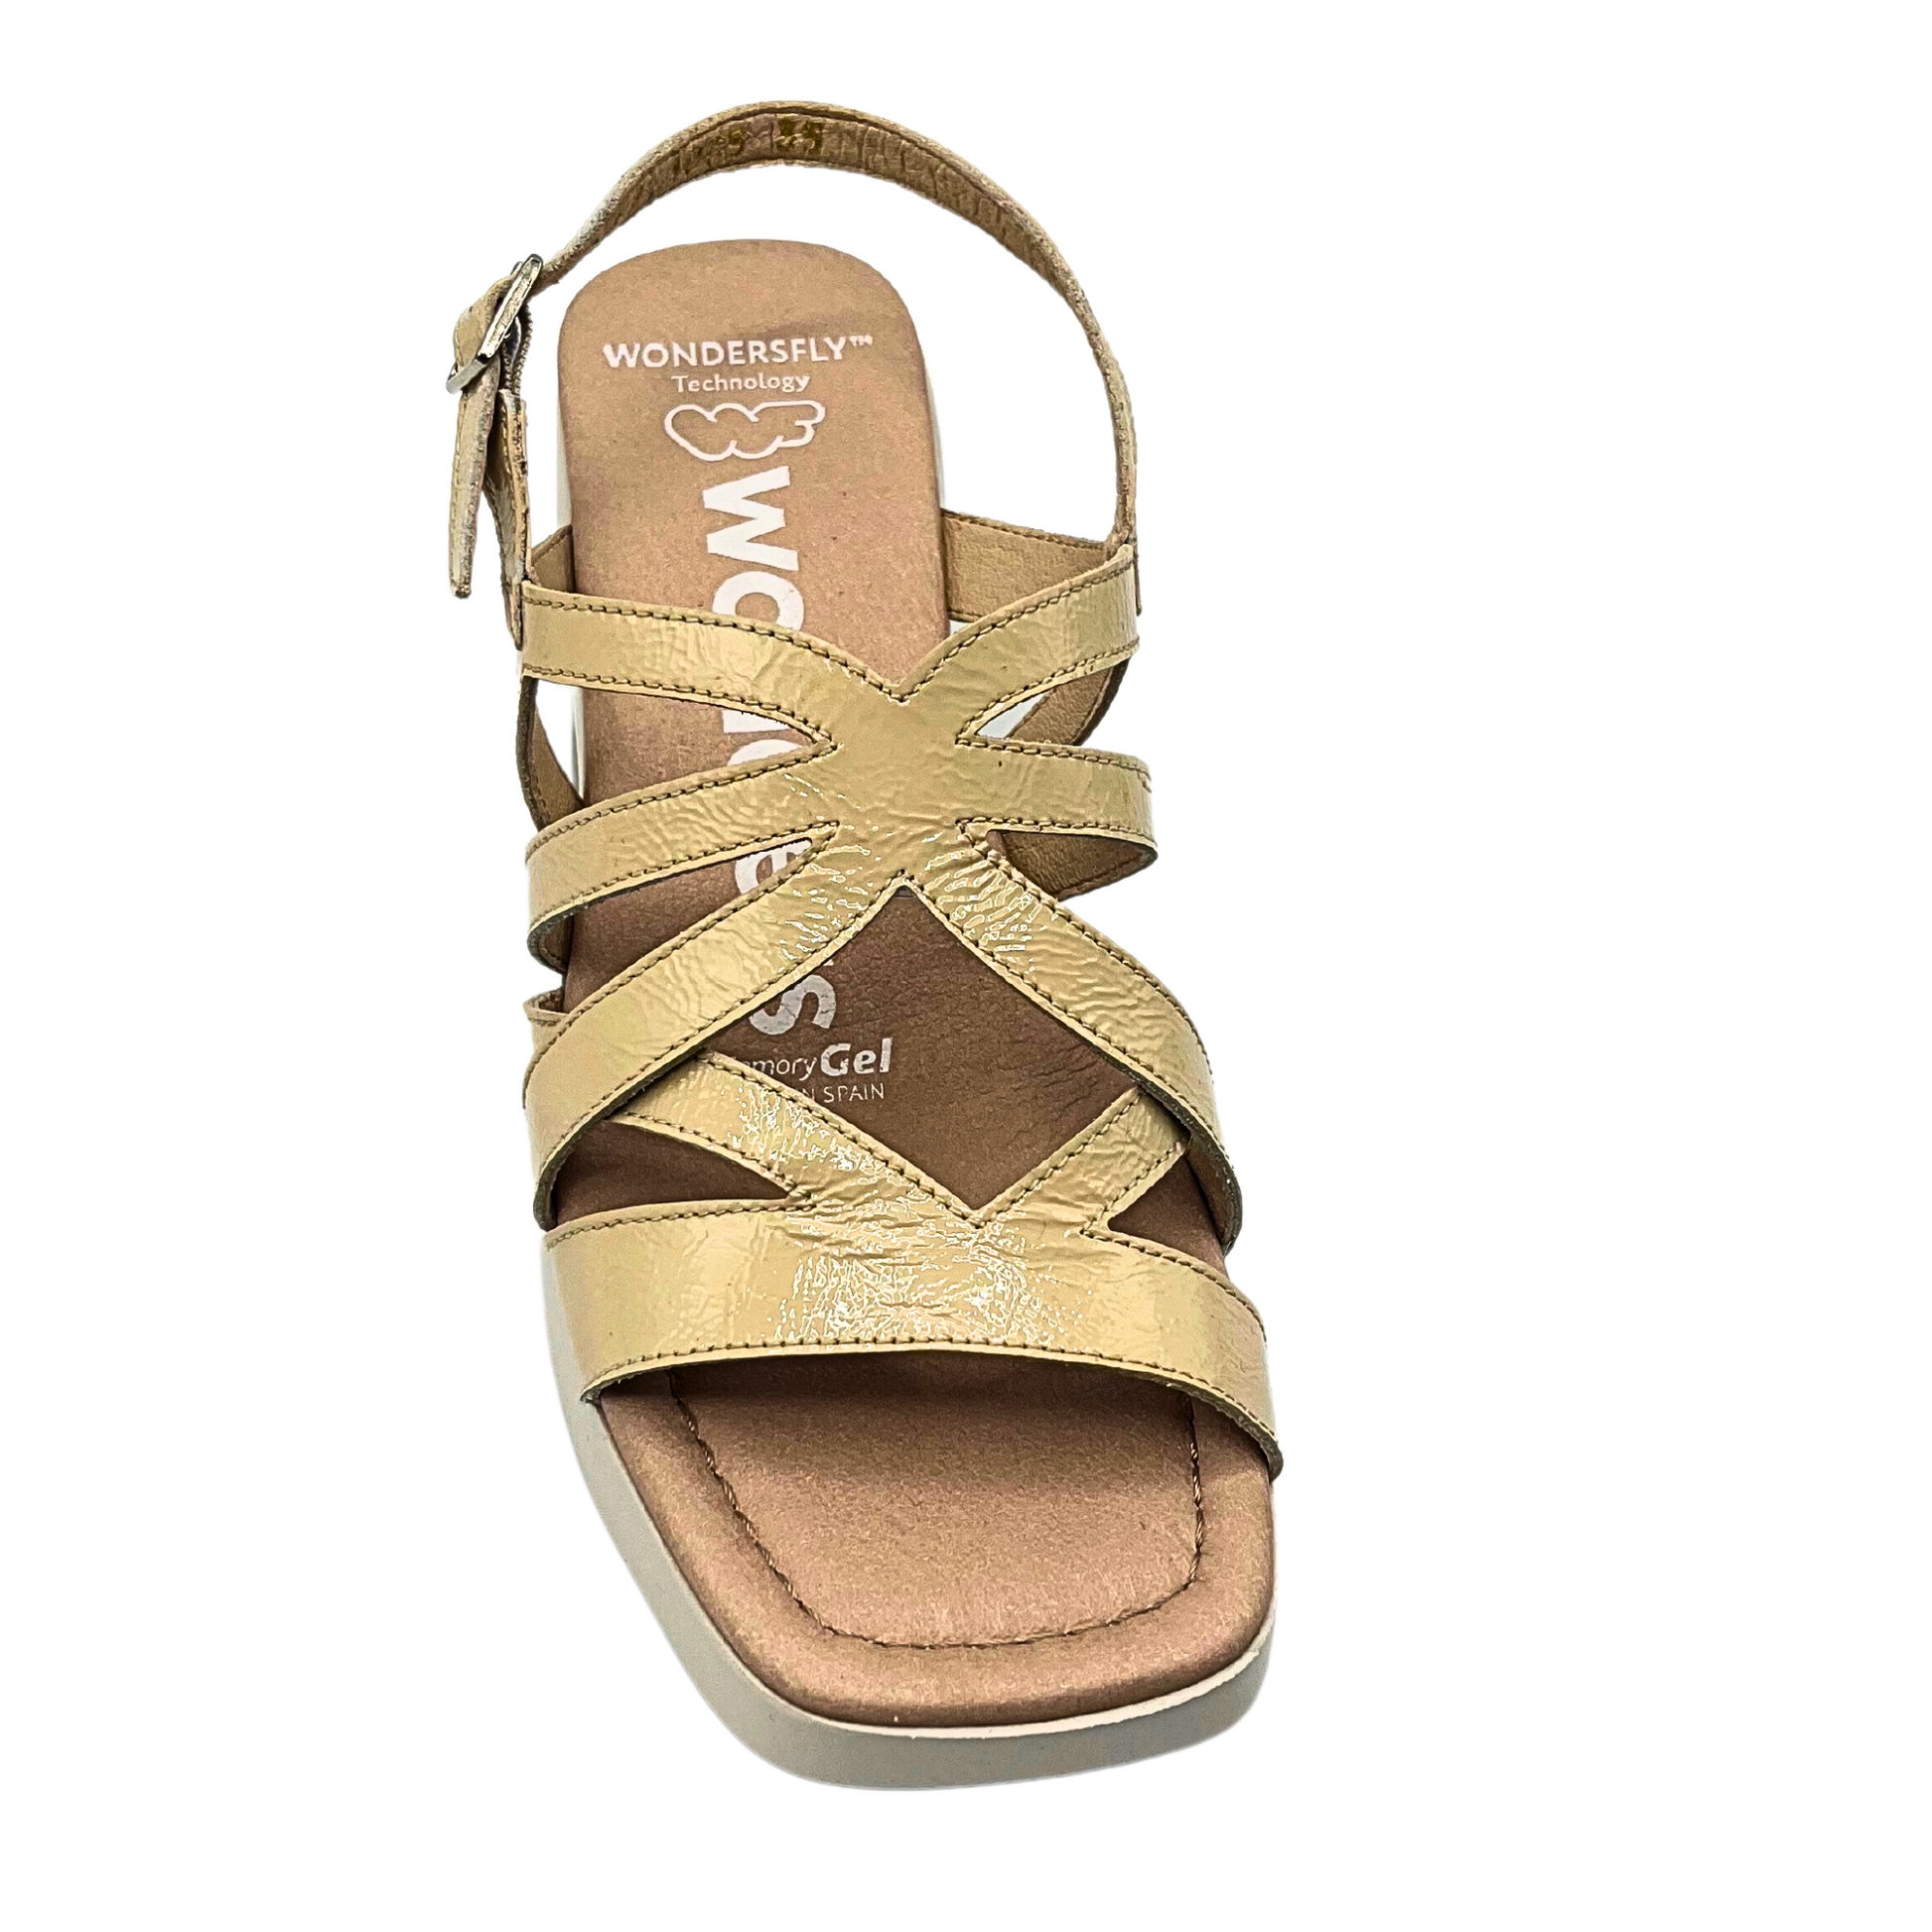 Top down view of Wonders Paules sandal in a soft taupe